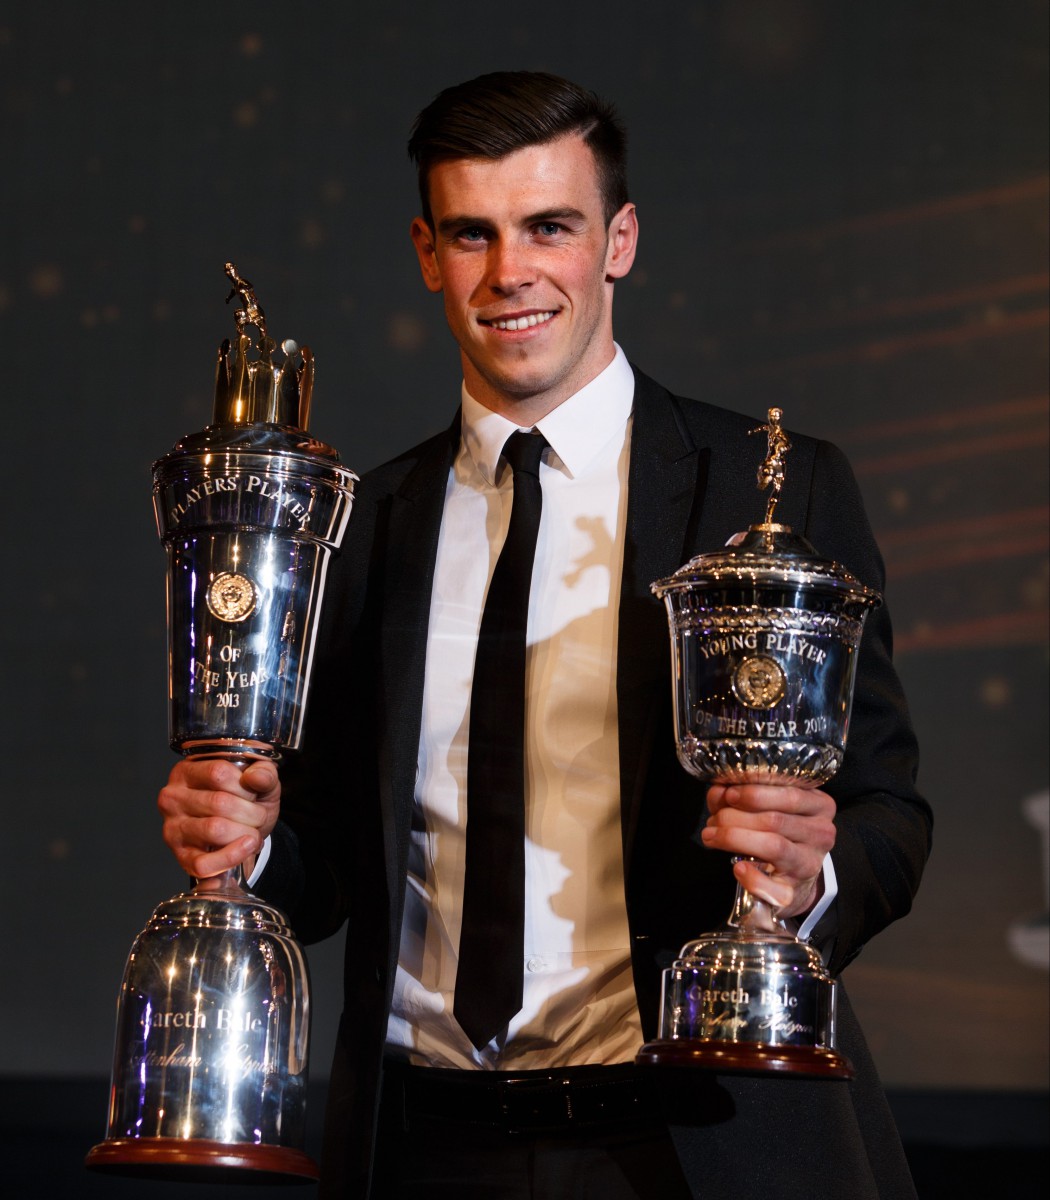 Gareth Bale made the cut for Carragher after winning the PFA Player of the Year twice in three years before joining Real Madrid